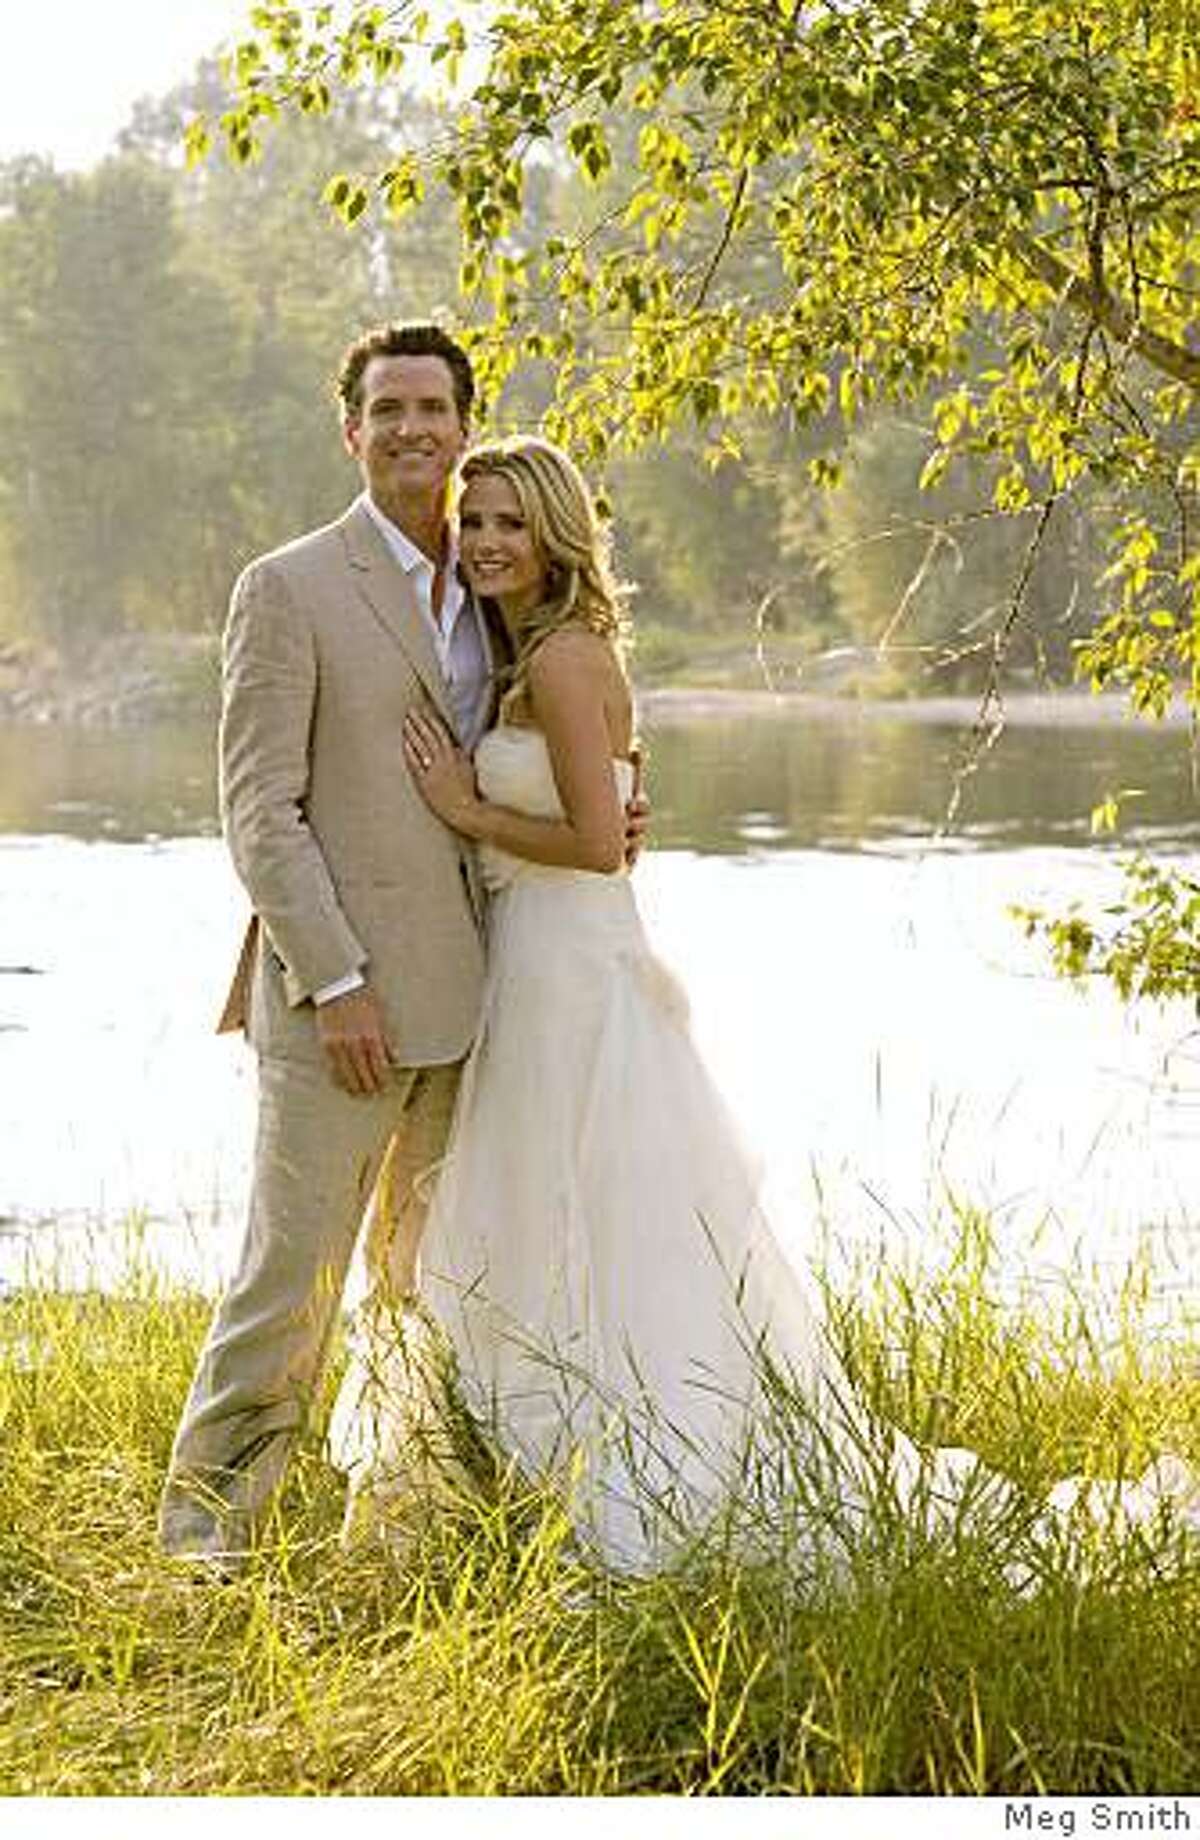 San Francisco Mayor Gavin Newsom poses with his new wife actress Jennifer Siebel July 26, 2008 in Stevensville, Montana. Newsom and Siebel were married at her parents' Montana ranch. The actress has a recurring role on the TV series "Life." (Meg Smith via Getty Images)